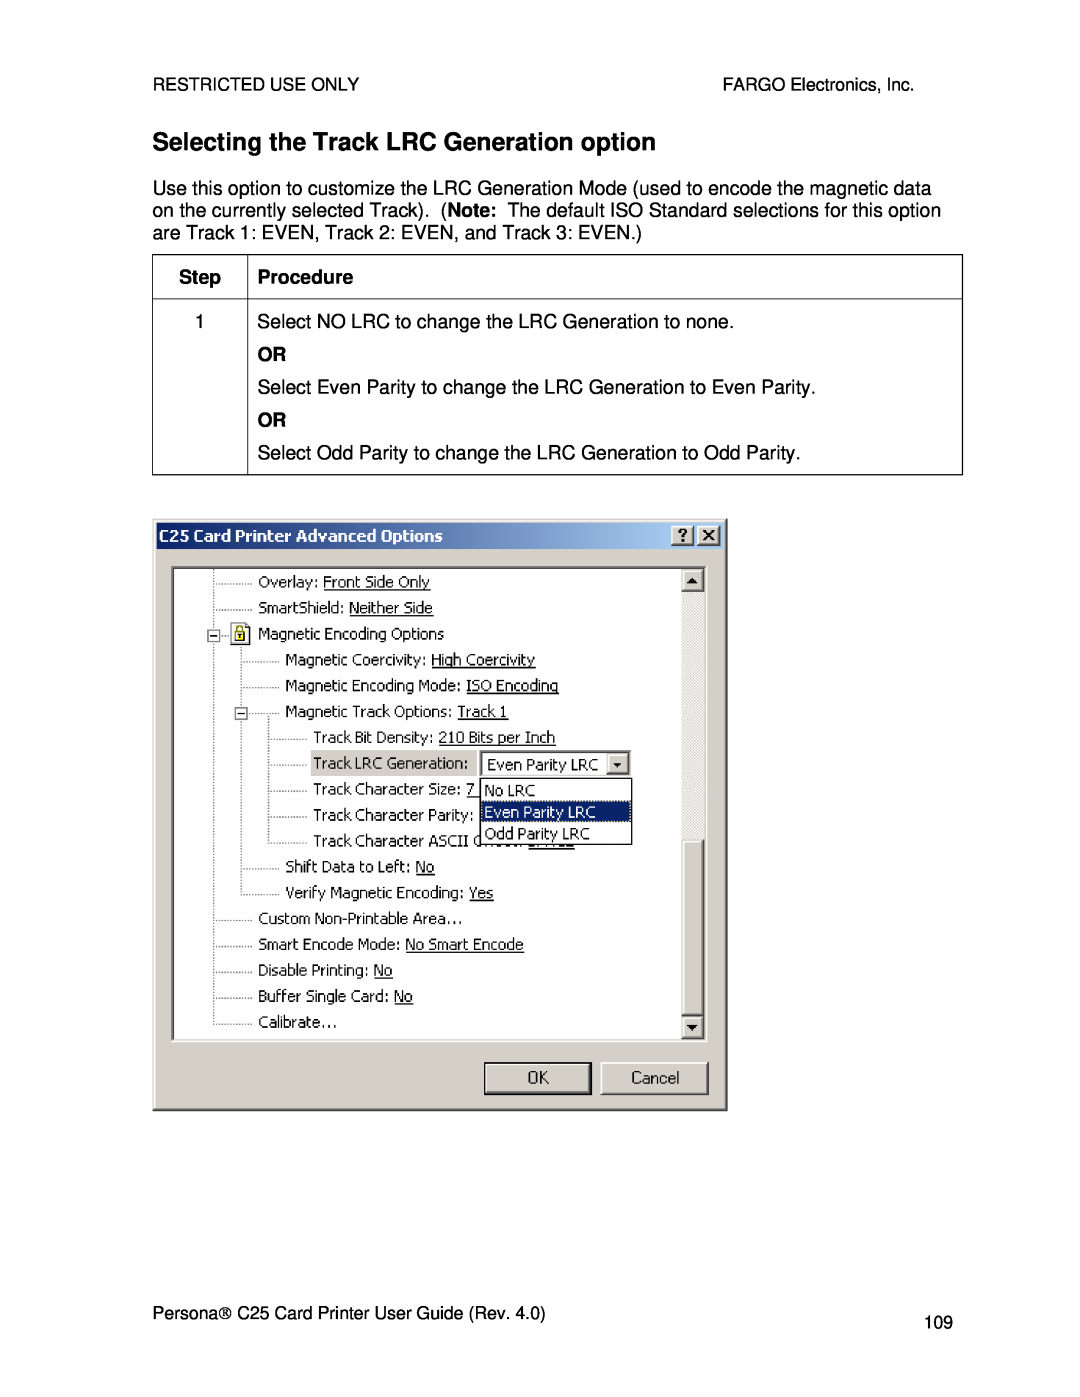 FARGO electronic S000256 manual Selecting the Track LRC Generation option 